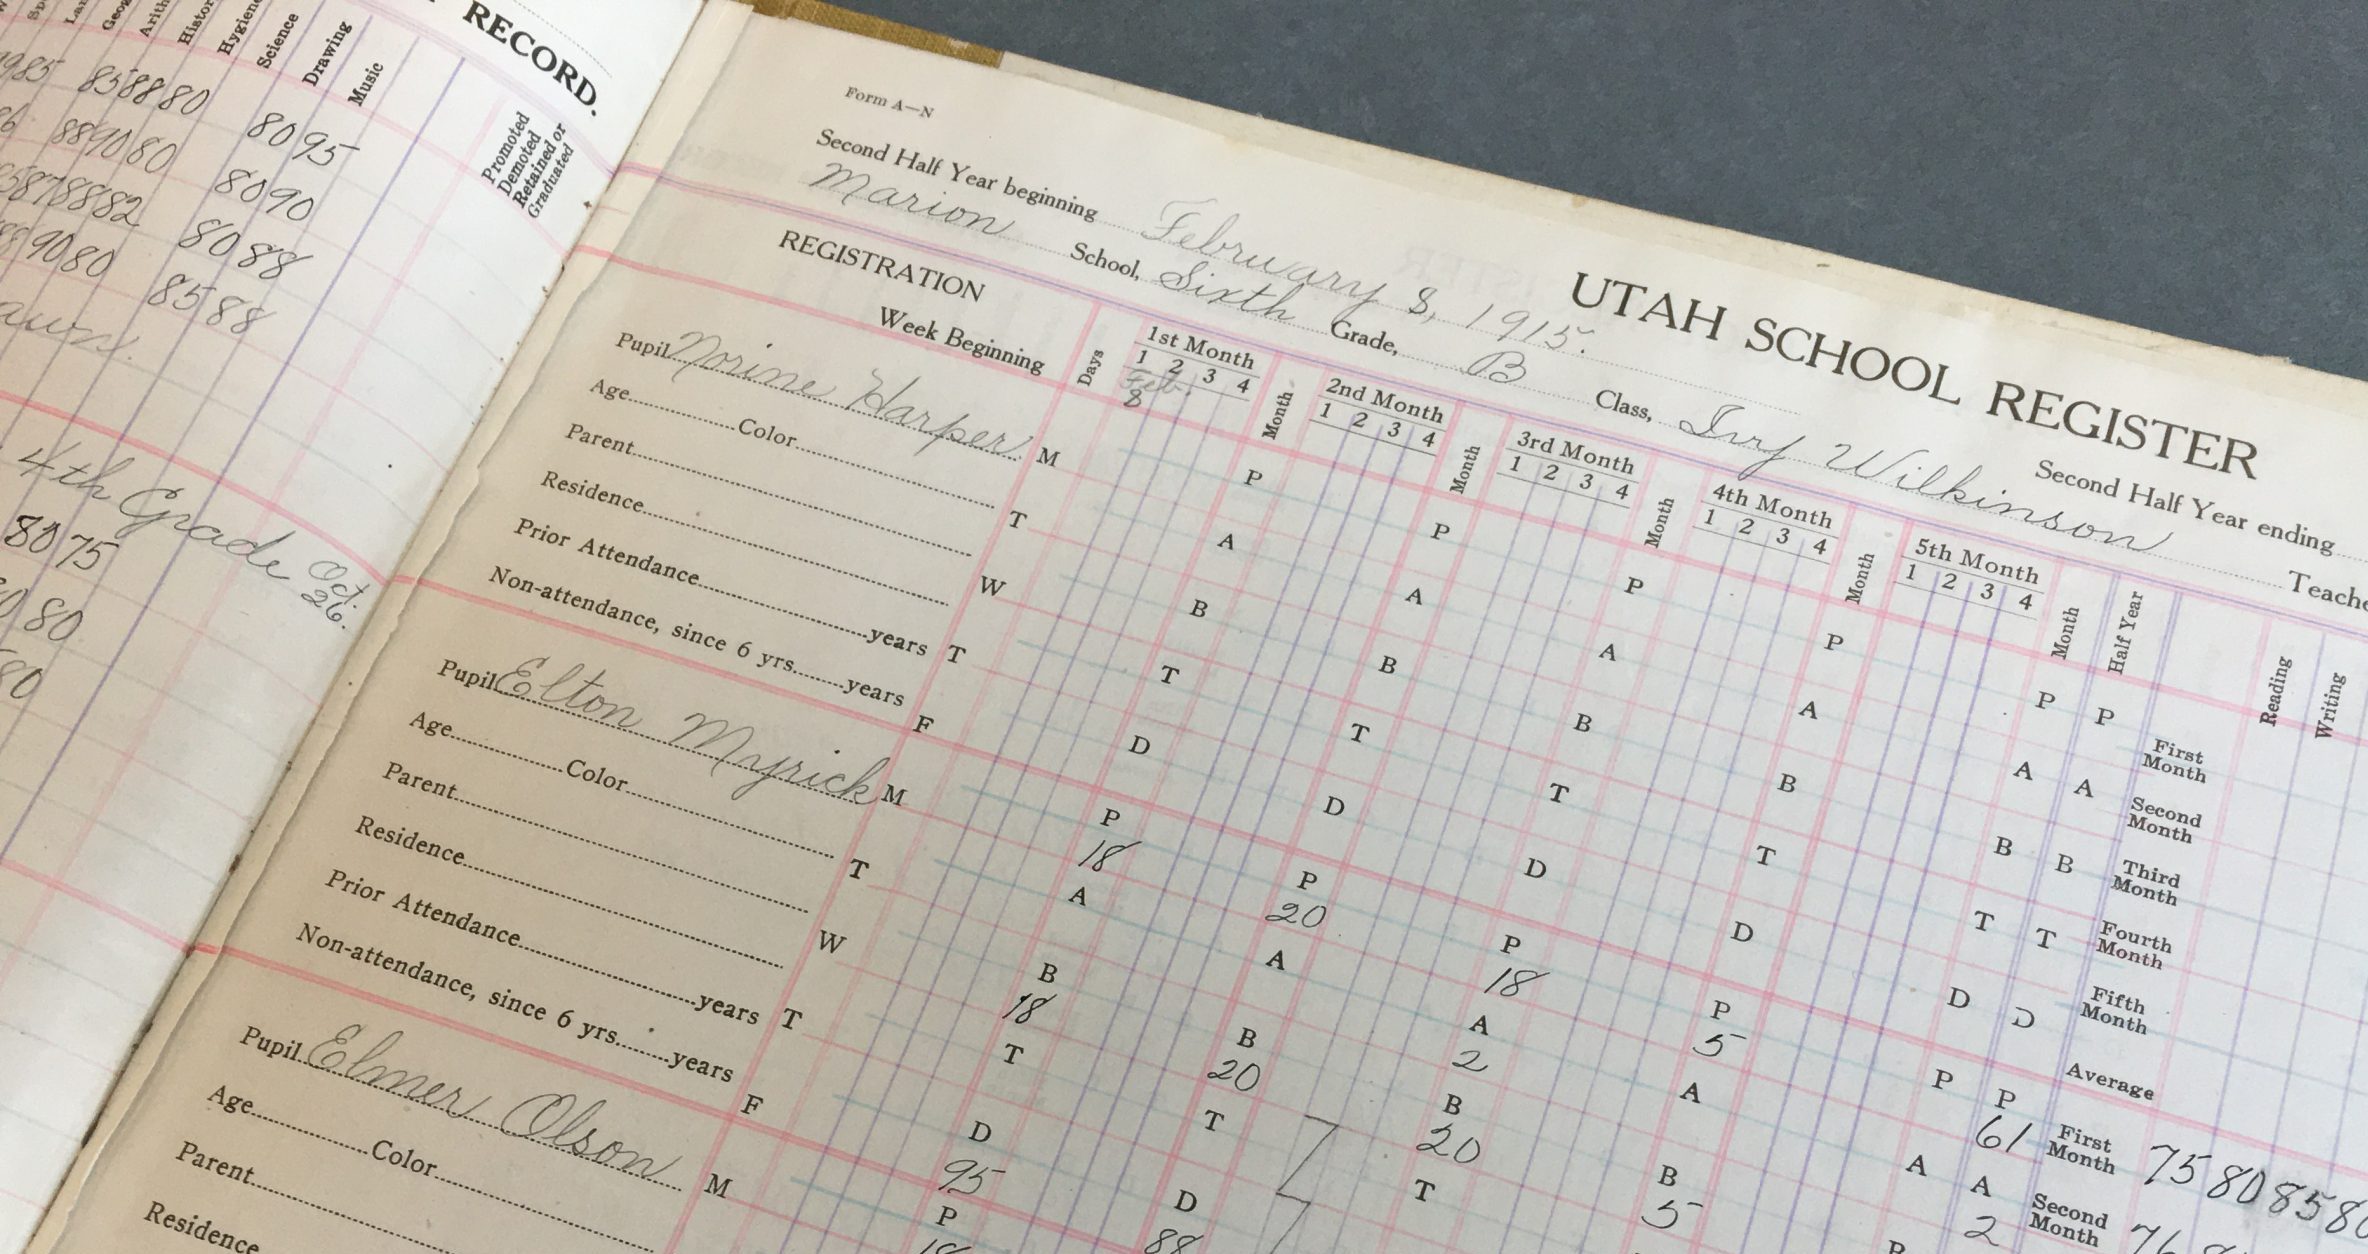 Photo of page from the South Summit School District Class registers. Marion School, Sept 1914 -May 1915.